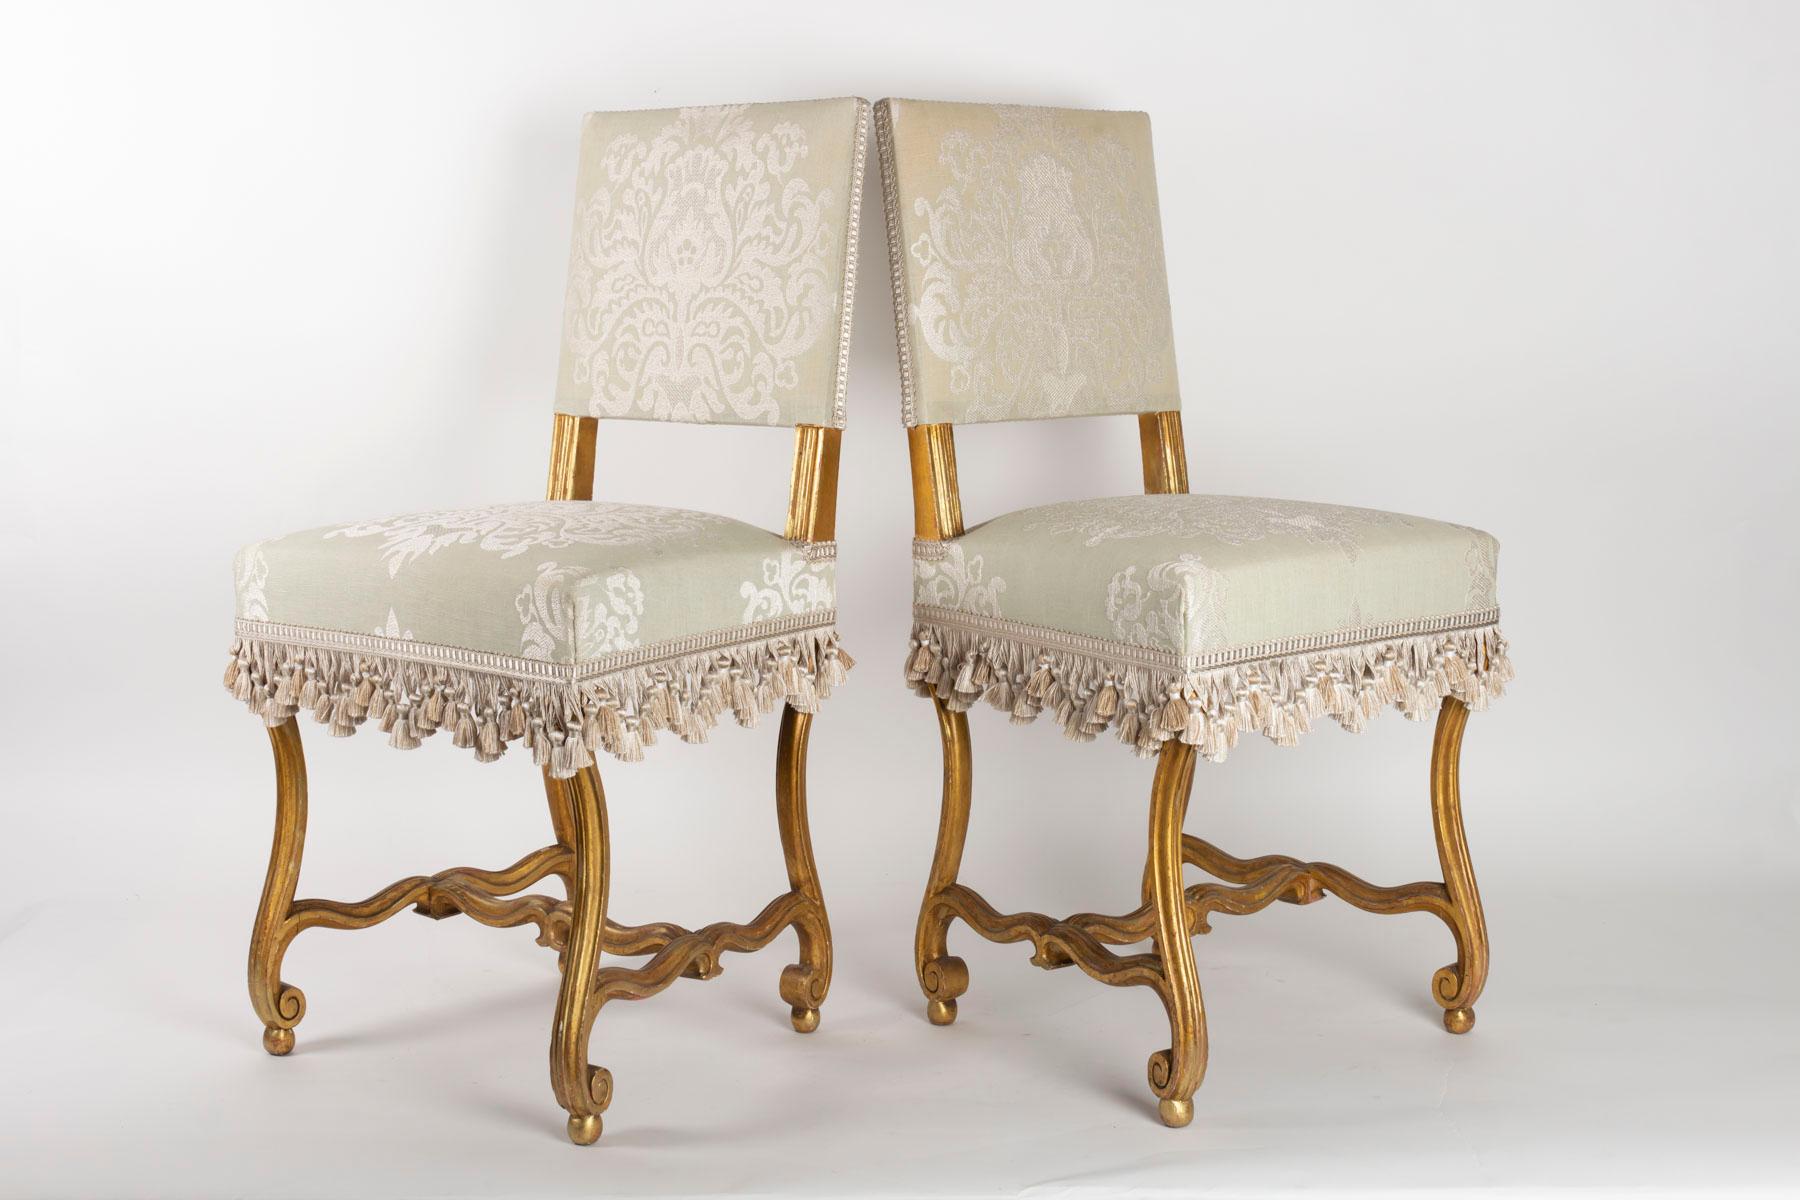 Gilt Pair of Chairs, Sheep Bones, Carved and Gilded Wooden, Napoleon III Period